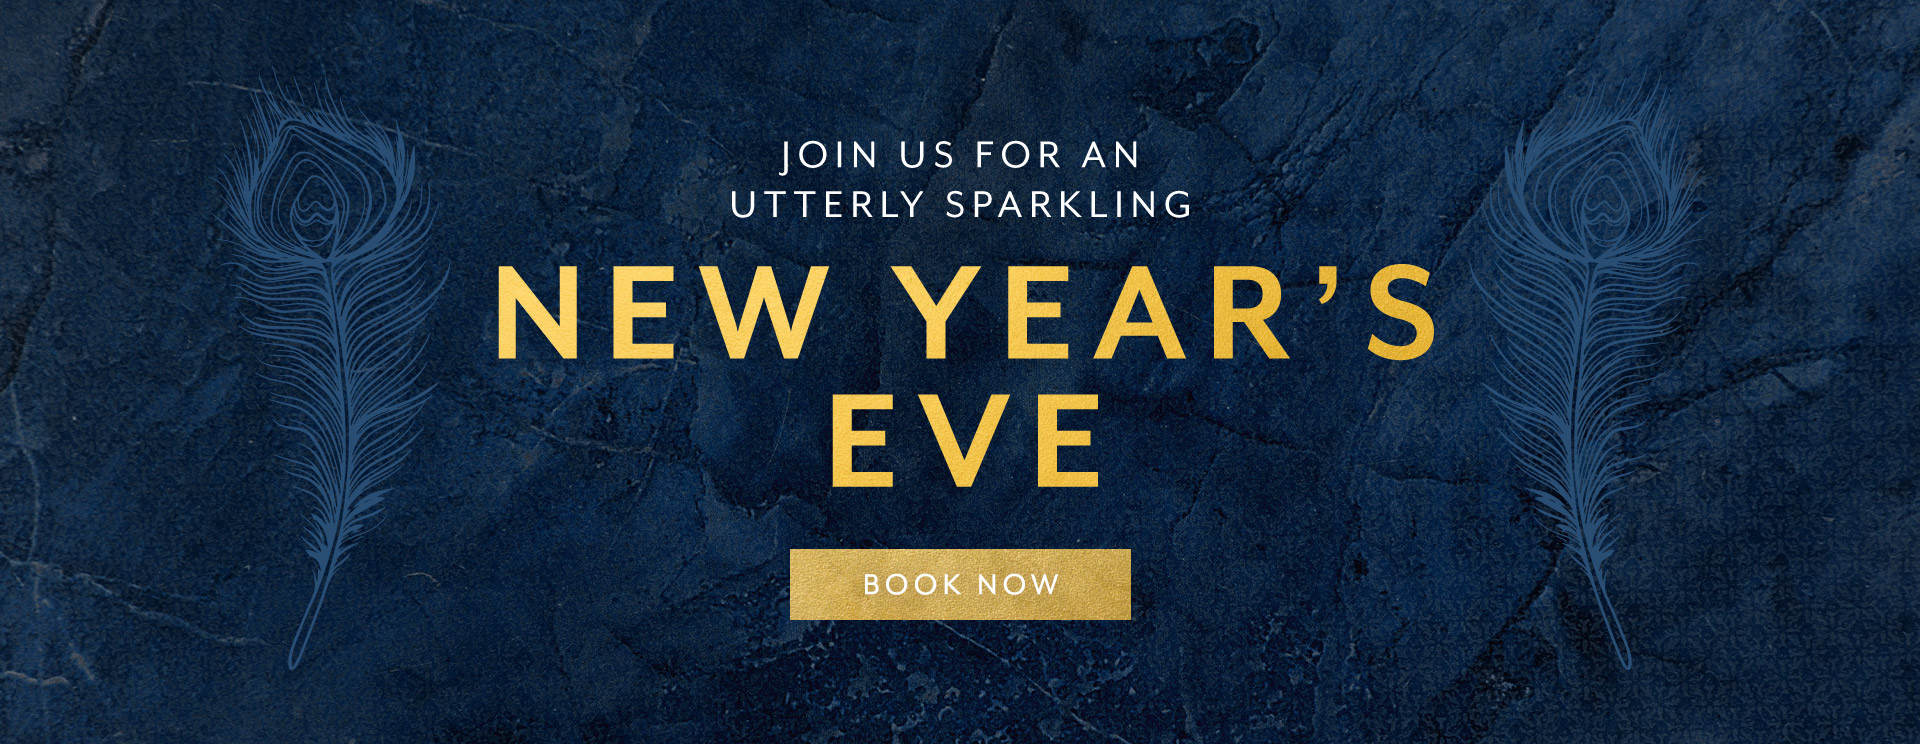 New Year's Eve at The Woolpack